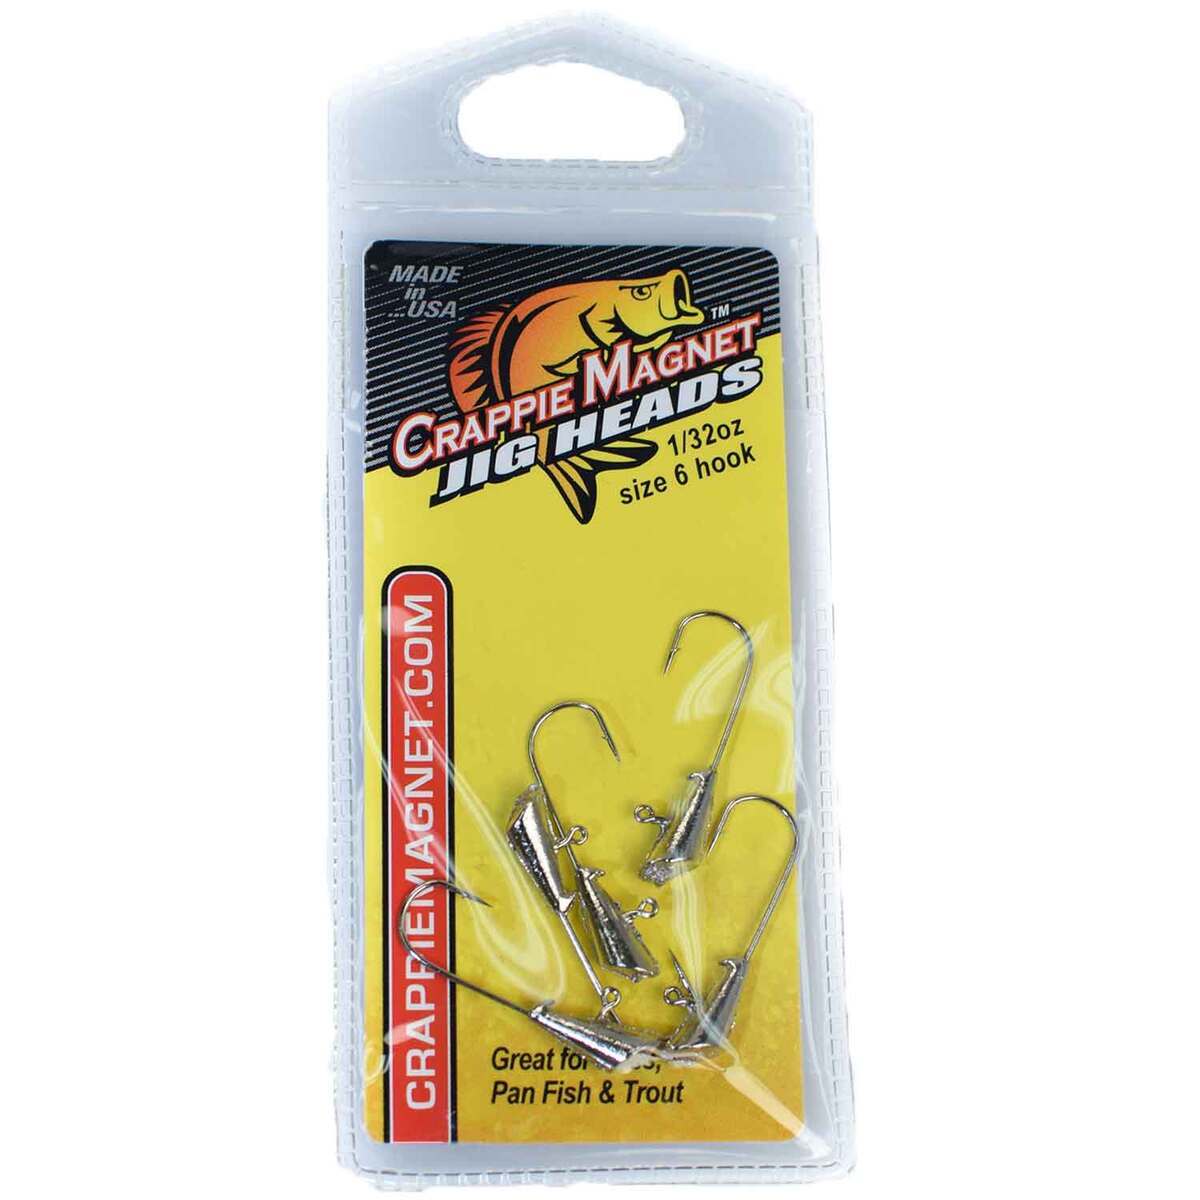 Leland's Crappie Magnet Replacement Jig Heads, Gold